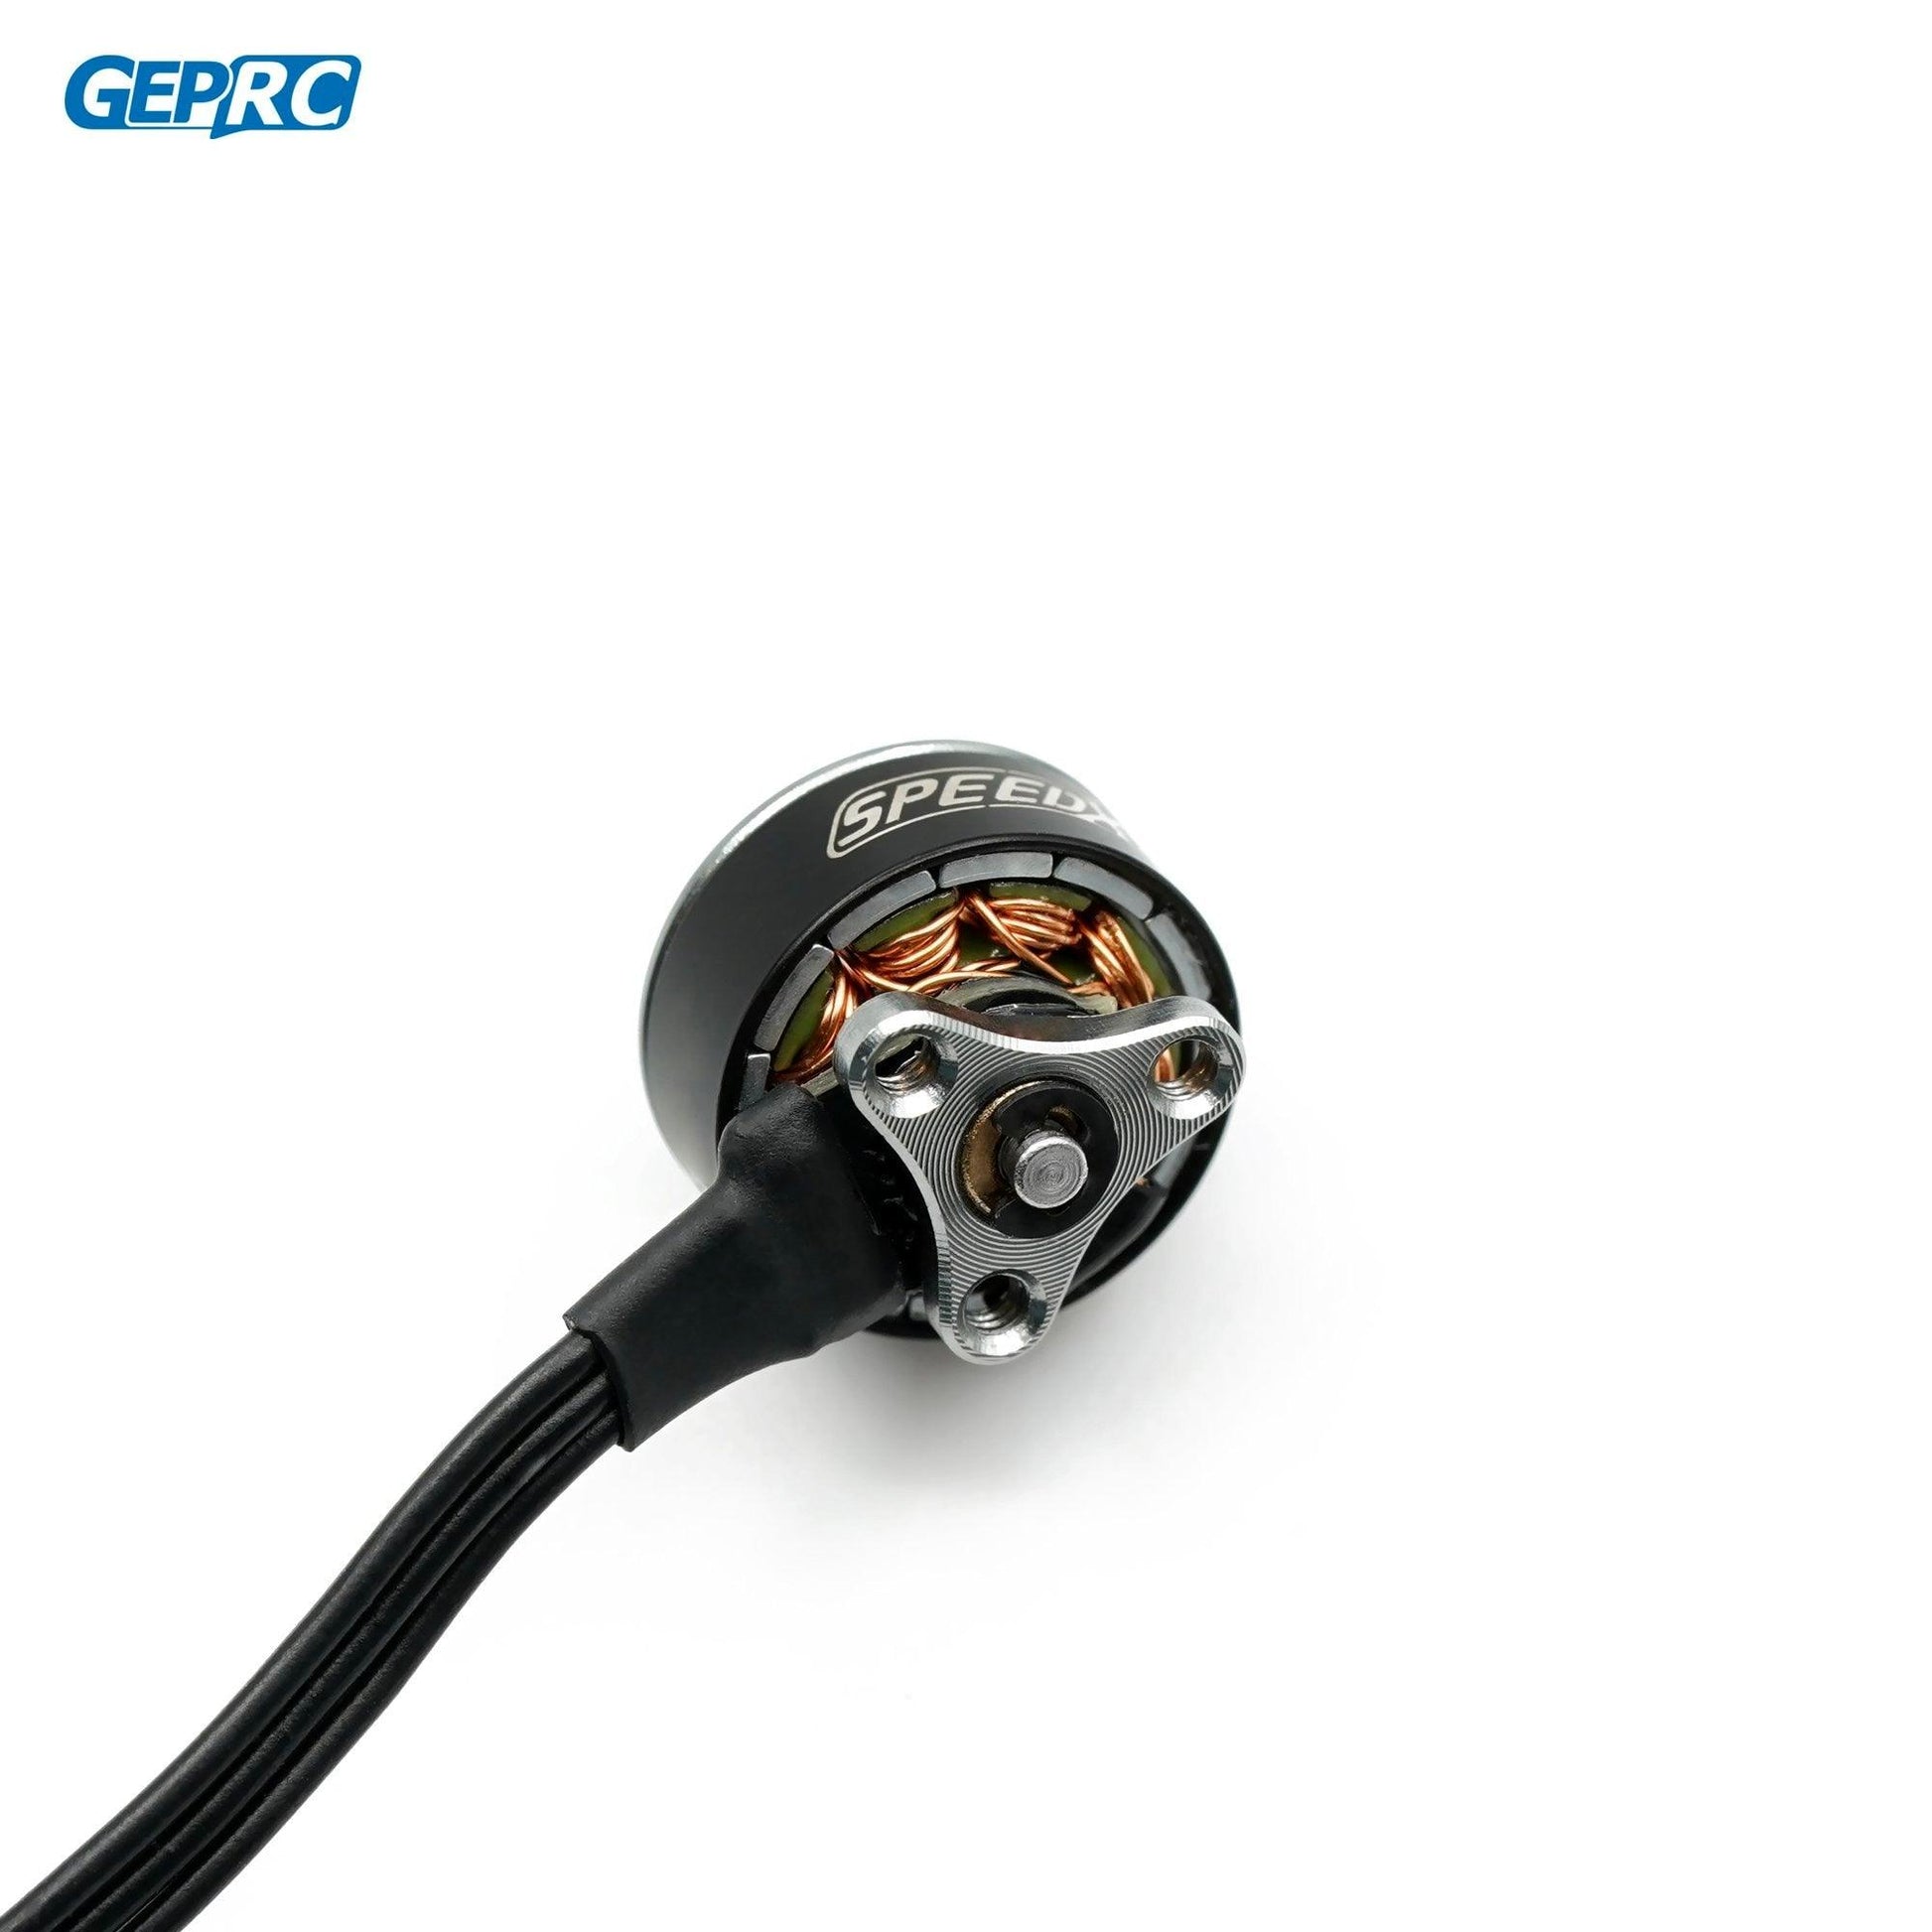 GEPRC SPEEDX2 0803 Brushless Motor - 11000KV Suitable For DIY RC FPV Quadcopter Tiny / Whoop Drone Accessories Replacement Parts - RCDrone